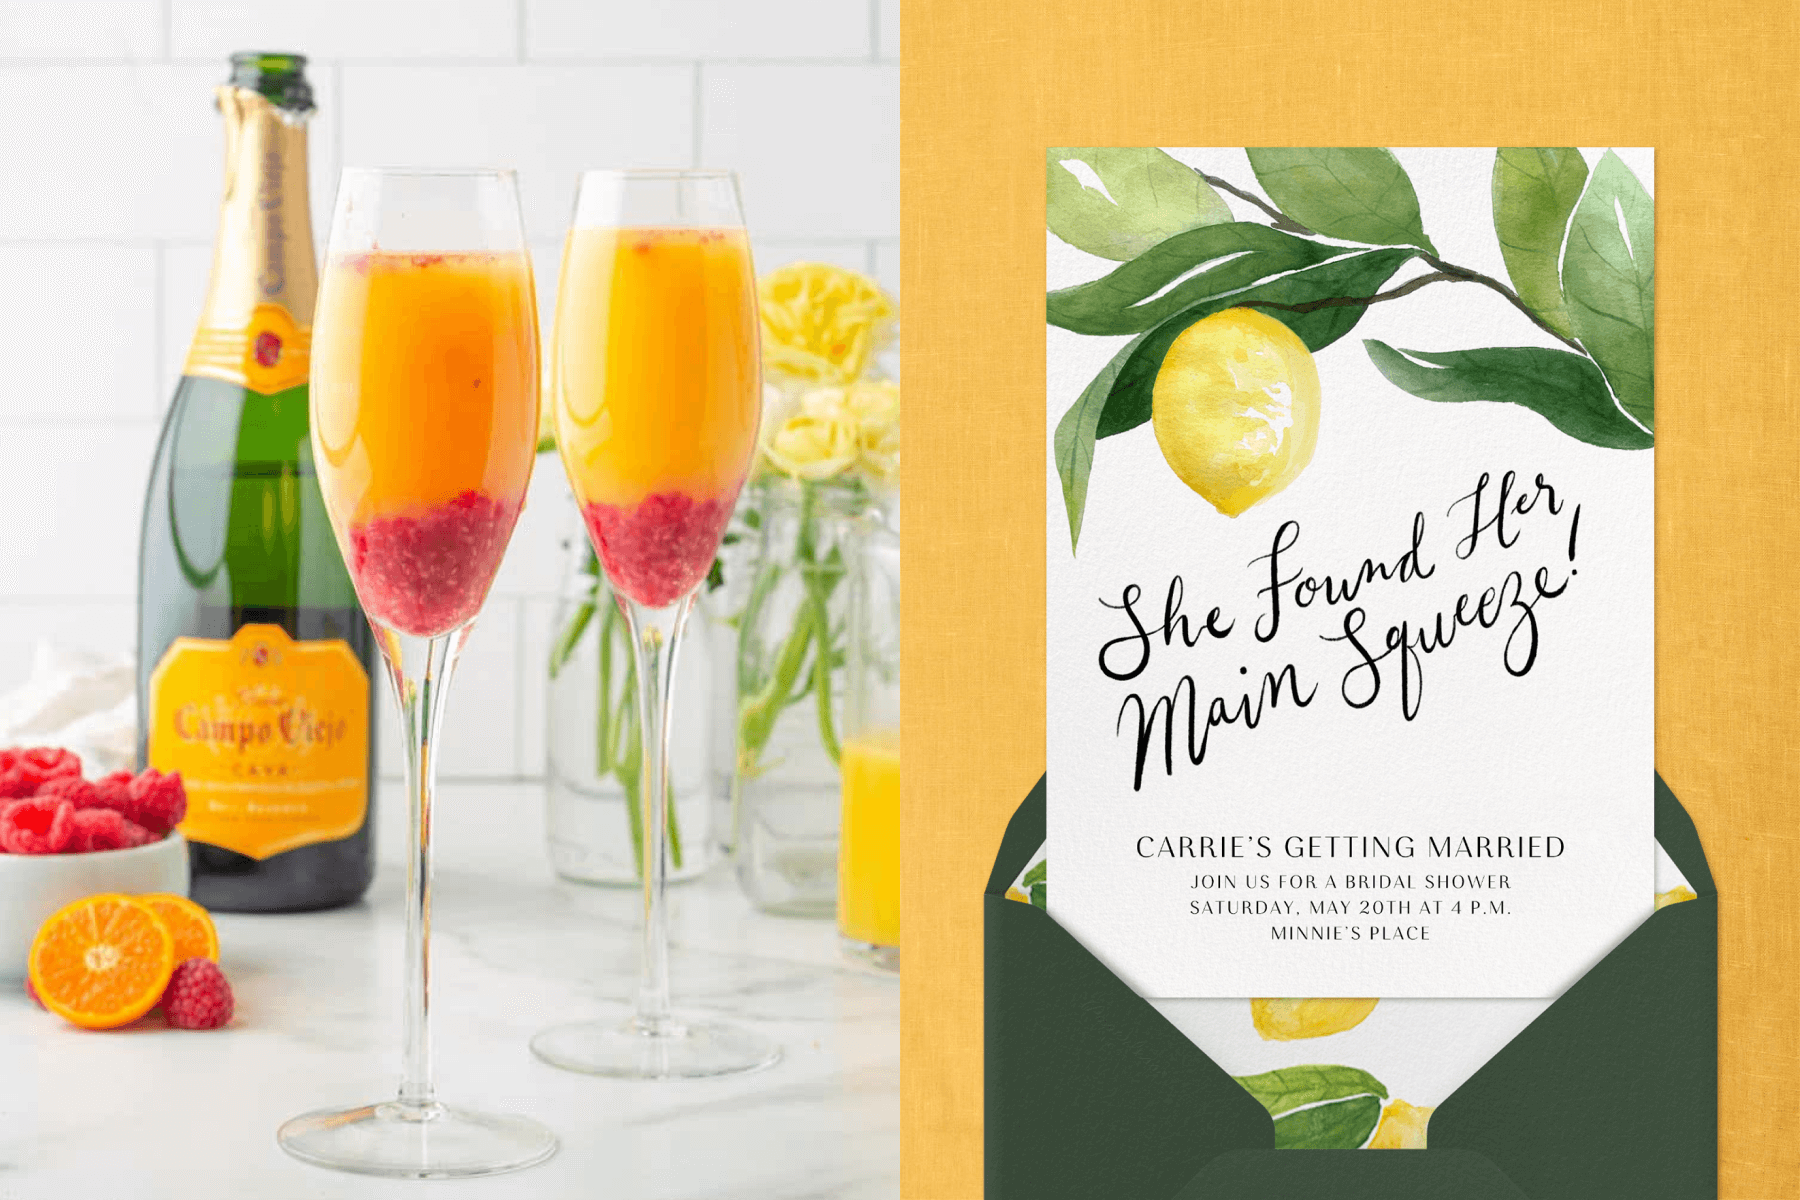 Left: Two Champagne flutes filled with orange juice and raspberries at the bottom are beside a bottle of Cava and bowl of fruit. Right: A bachelorette party invitation with a lemon tree branch and the words “She’s found her main squeeze!”